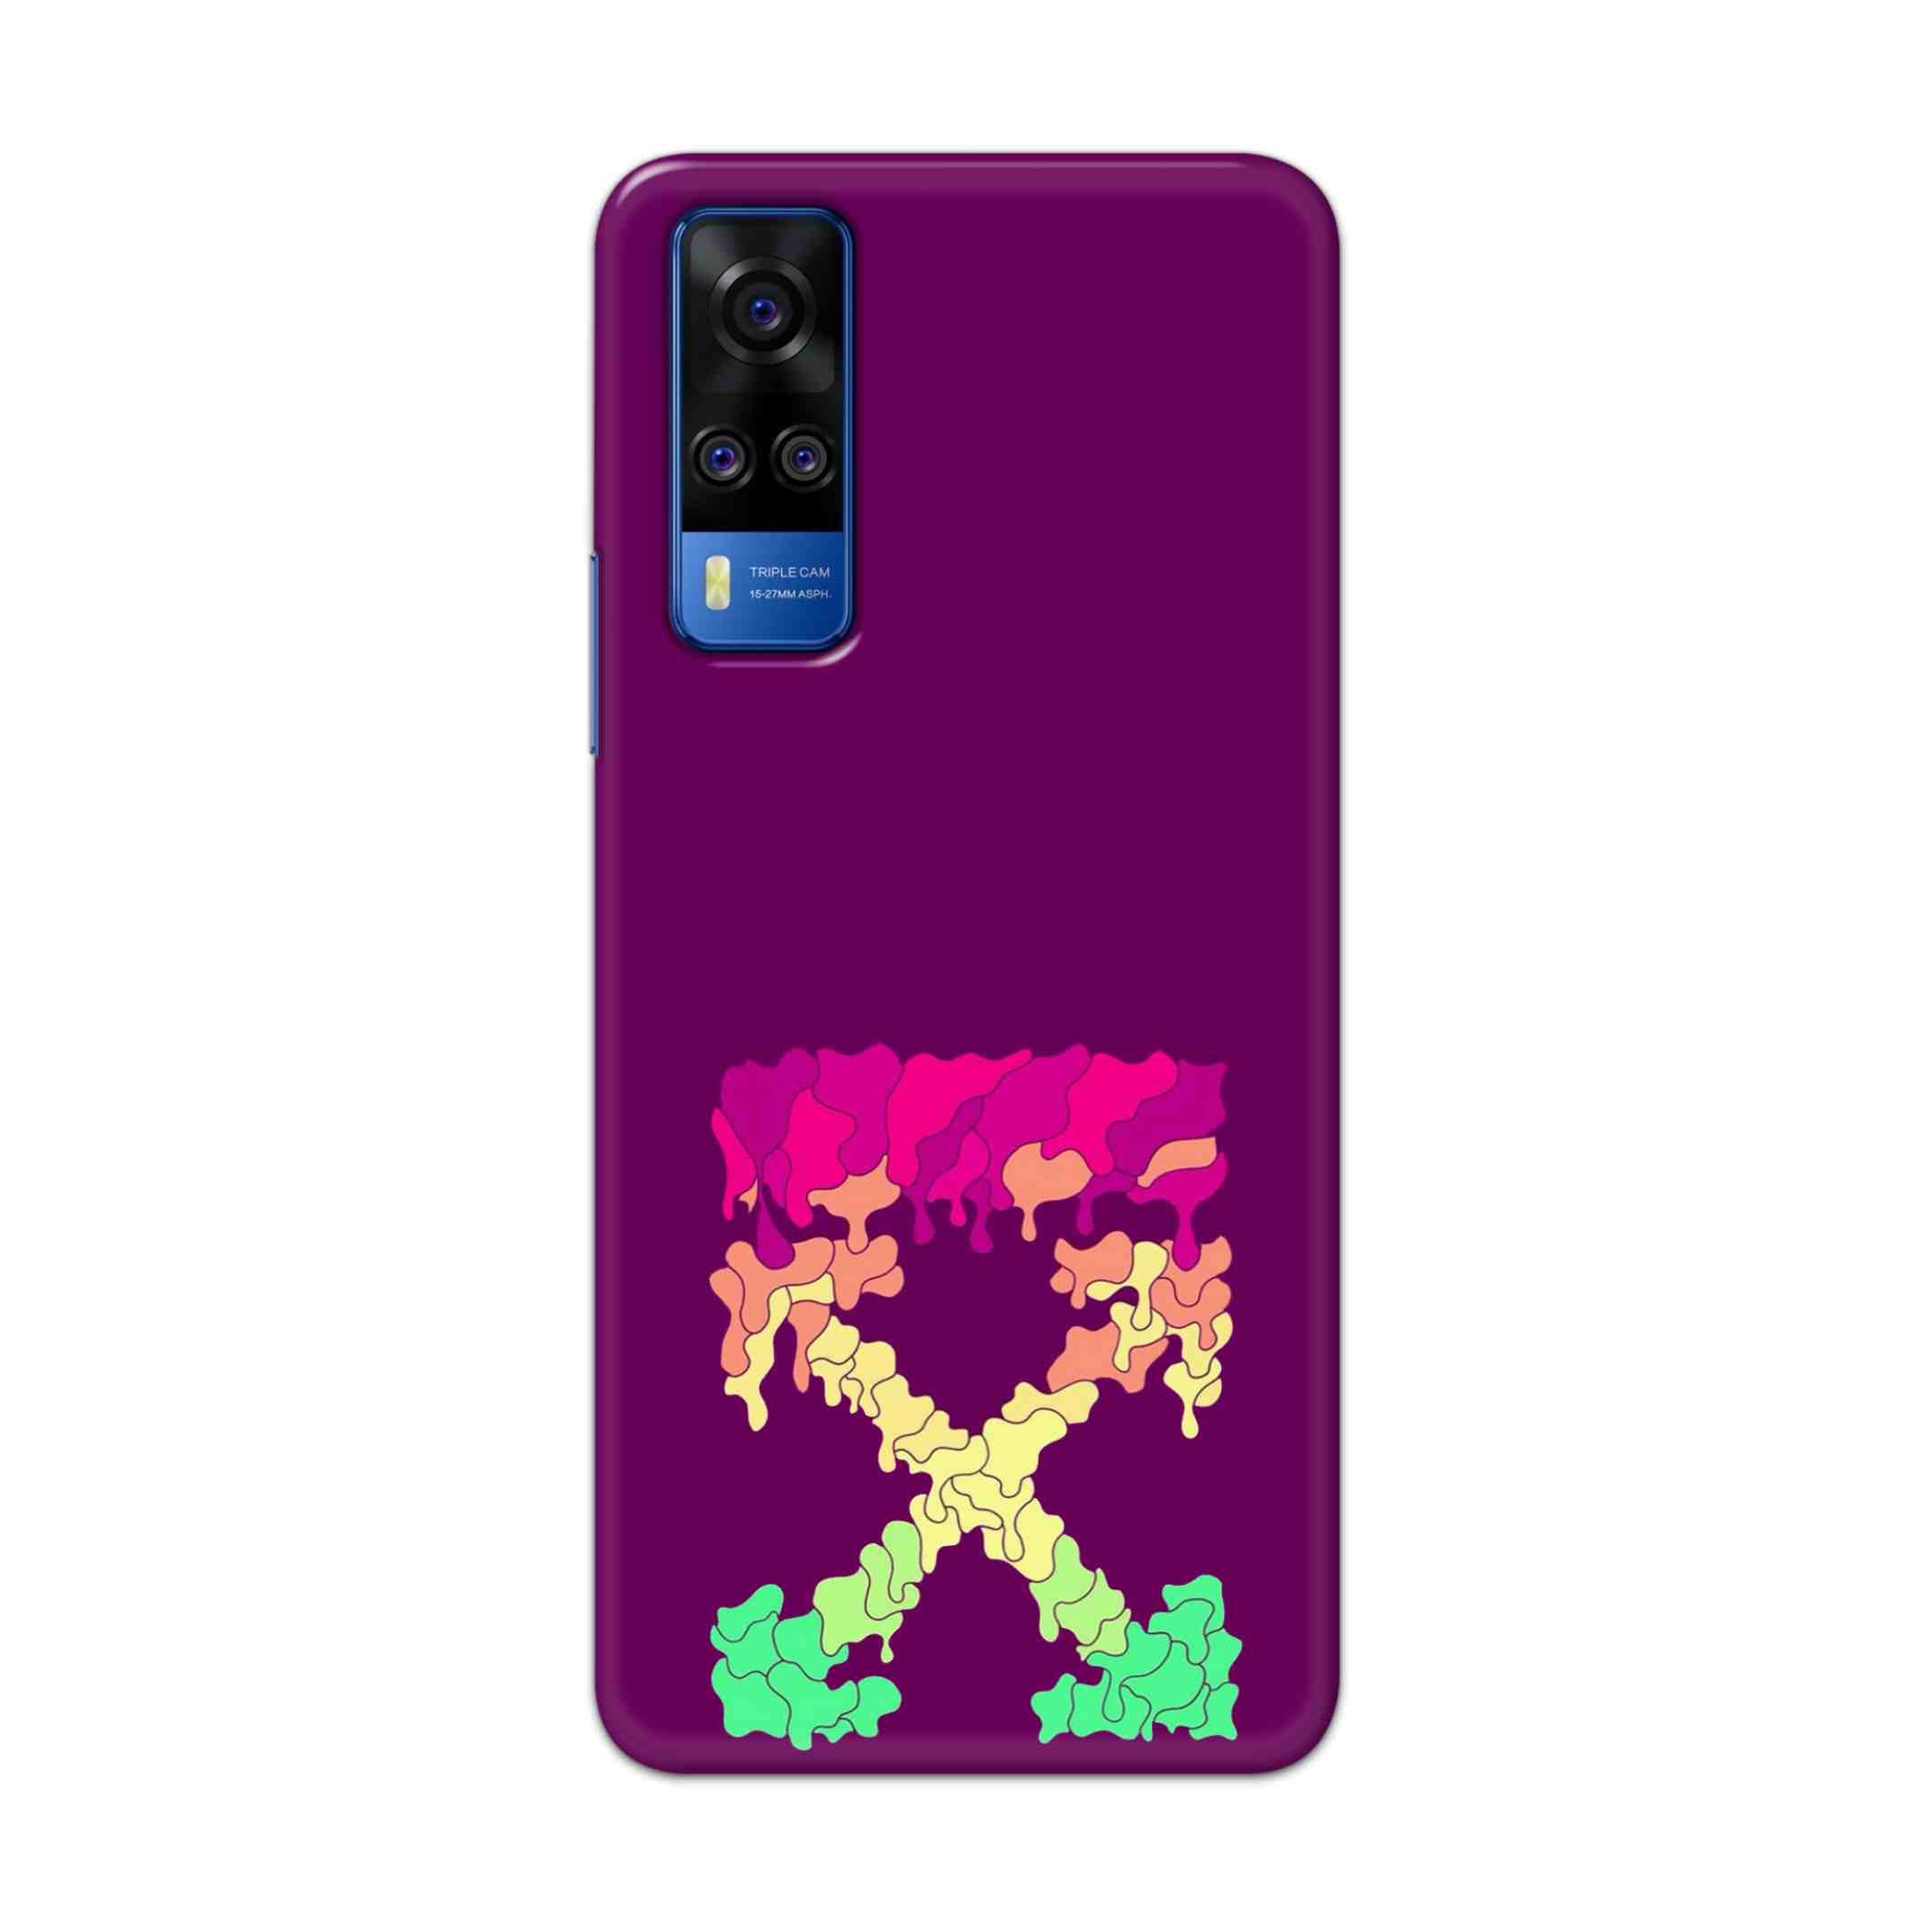 Buy X.O Hard Back Mobile Phone Case Cover For Vivo Y51a Online